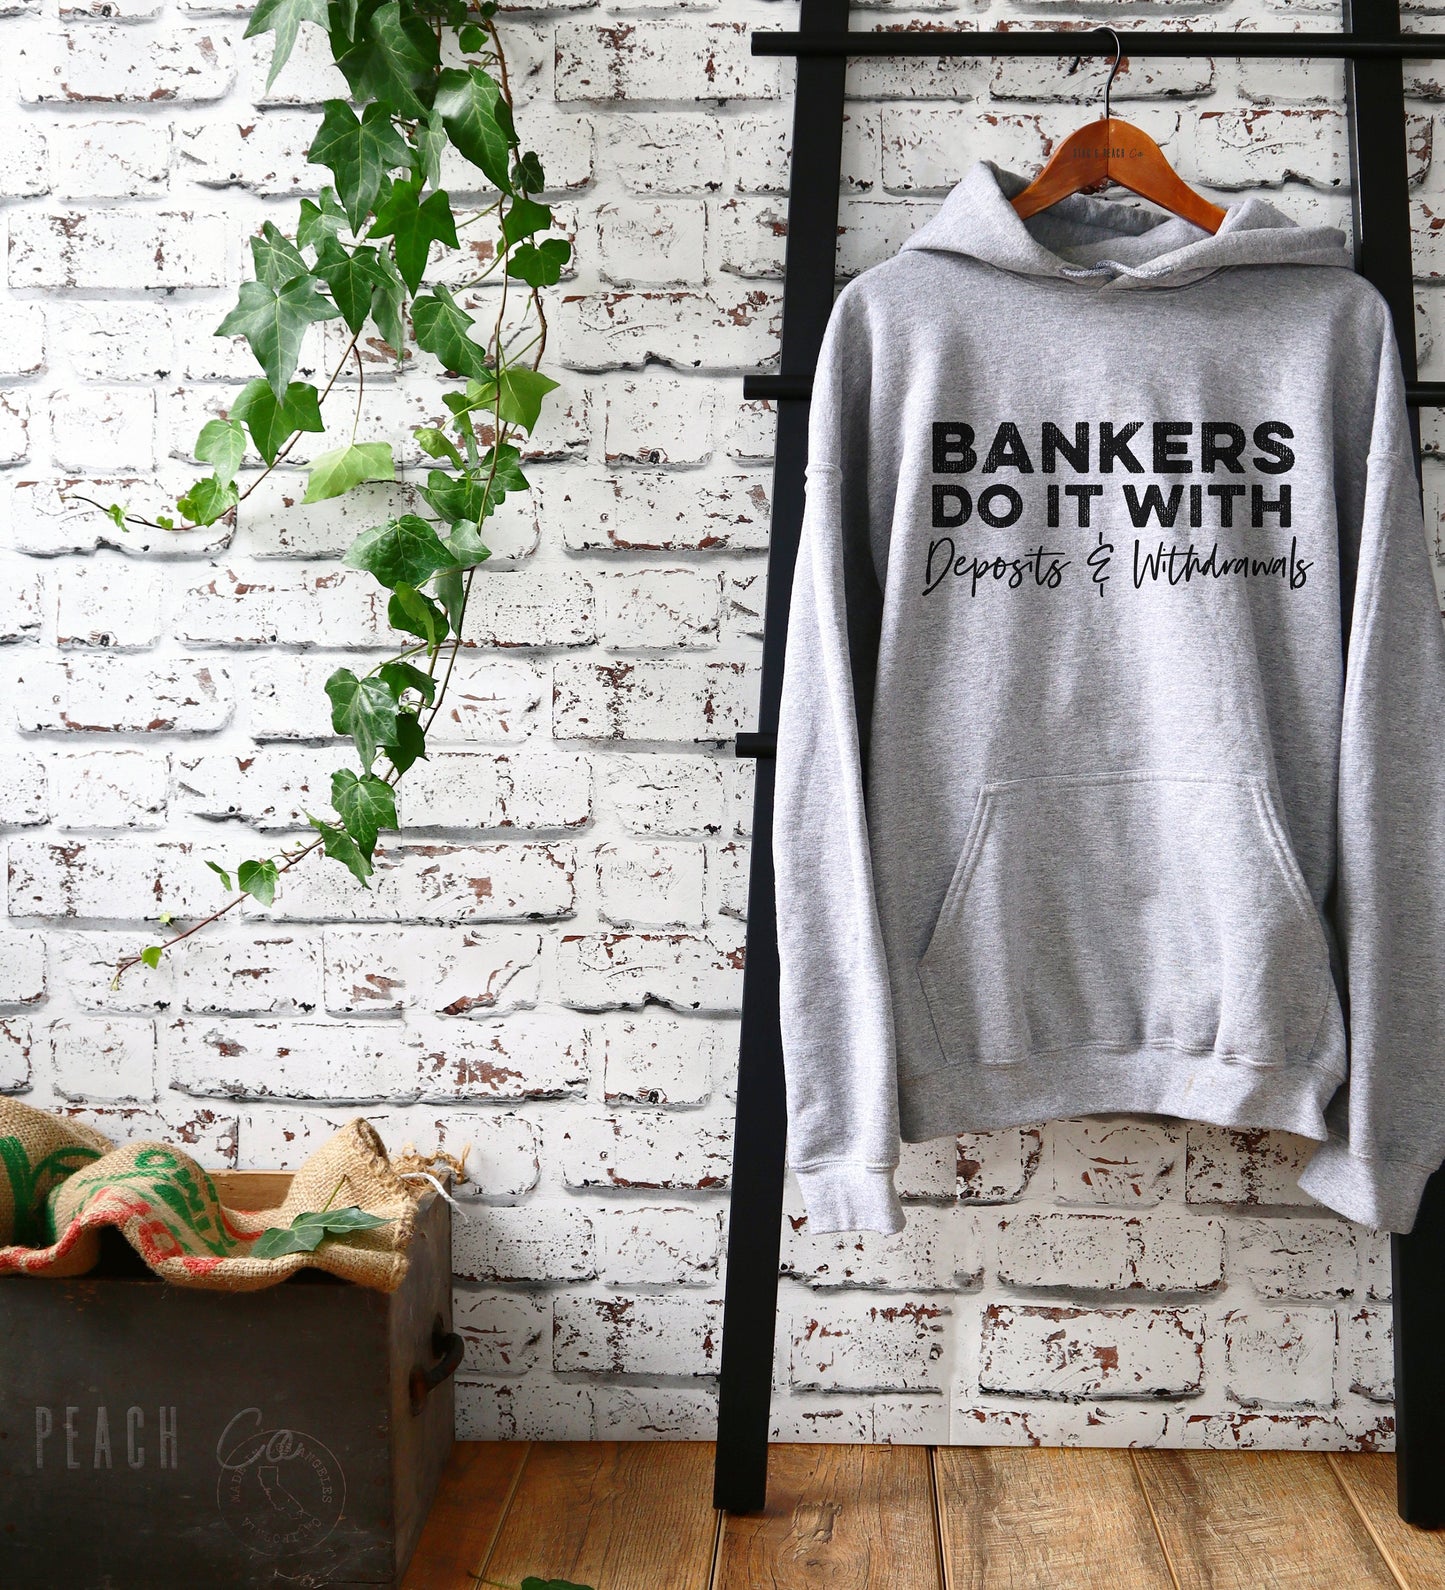 Bankers Do It With Deposits And Withdrawals Hoodie - Banker Shirt, Banker Gift, Banking Shirt, Banking Gift, Coworker Gift, Manager Shirt